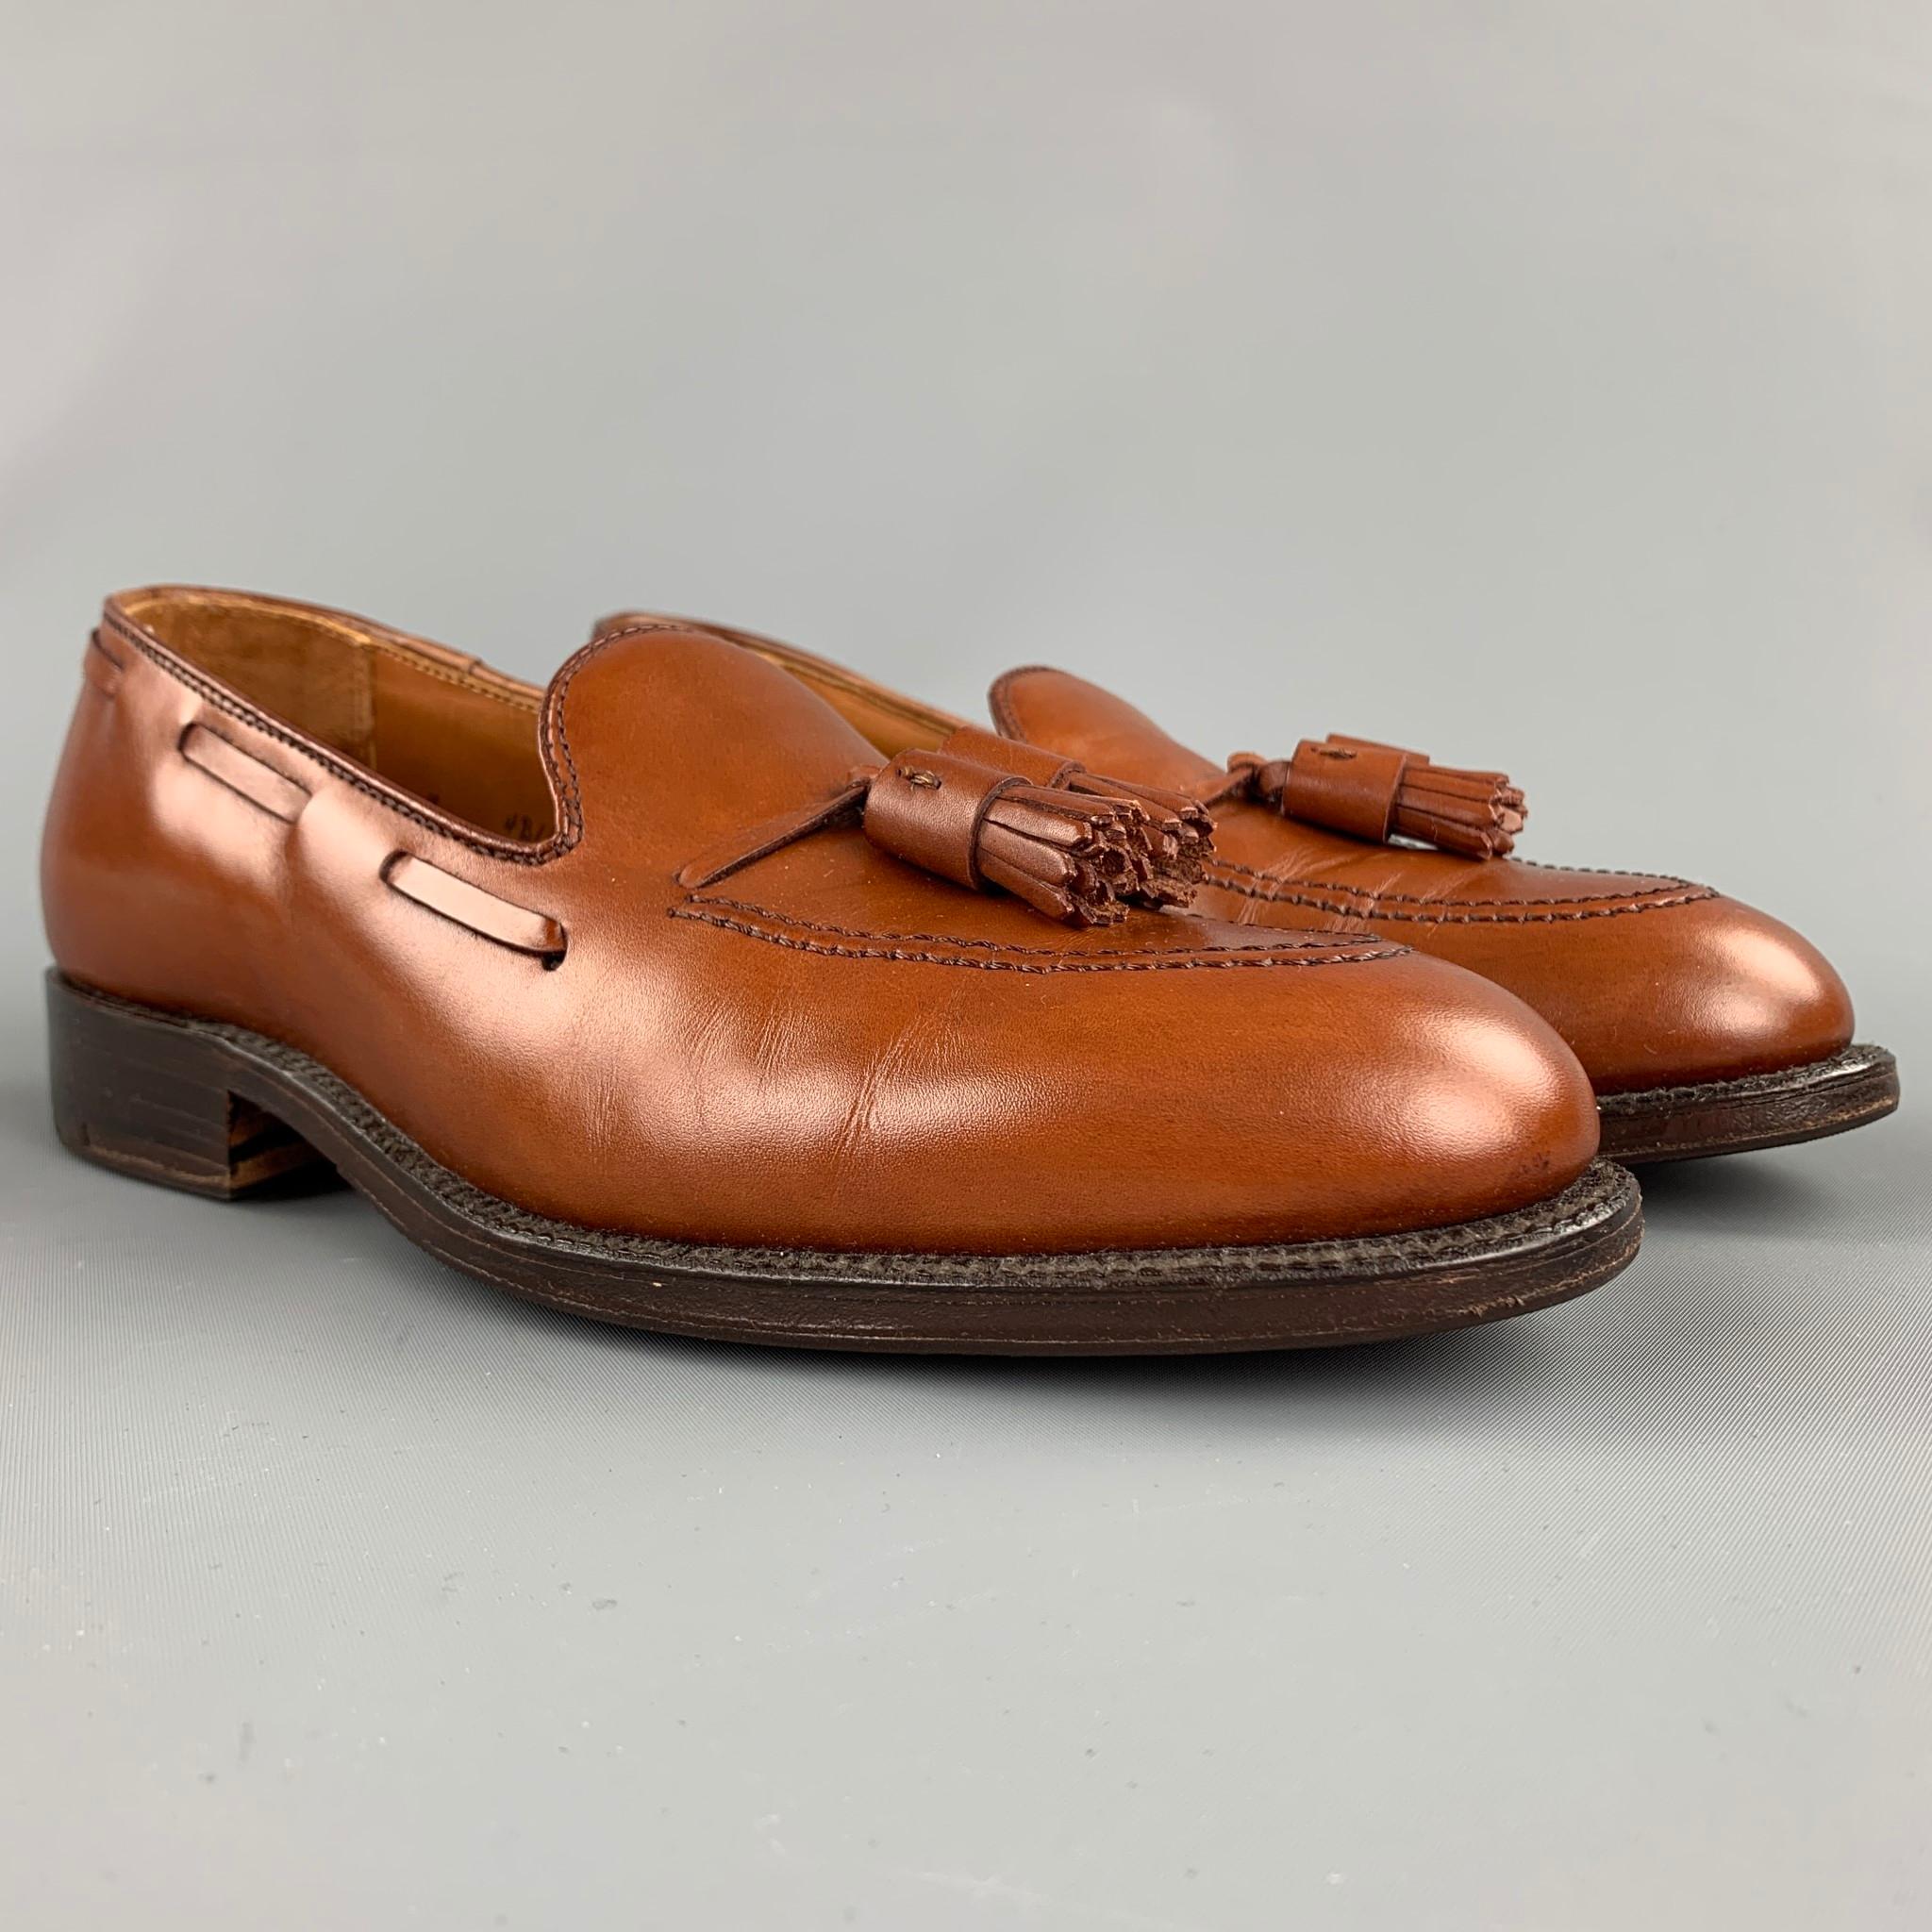 ALDEN loafers comes in a Burnished tan calf leather featuring front tassels, leather insole, top stitching, and a wooden sole. Made in USA.

New With Box. Pre-Owned Condition.
Marked: 7 D 662

Outsole: 11 in. x 4 in. 